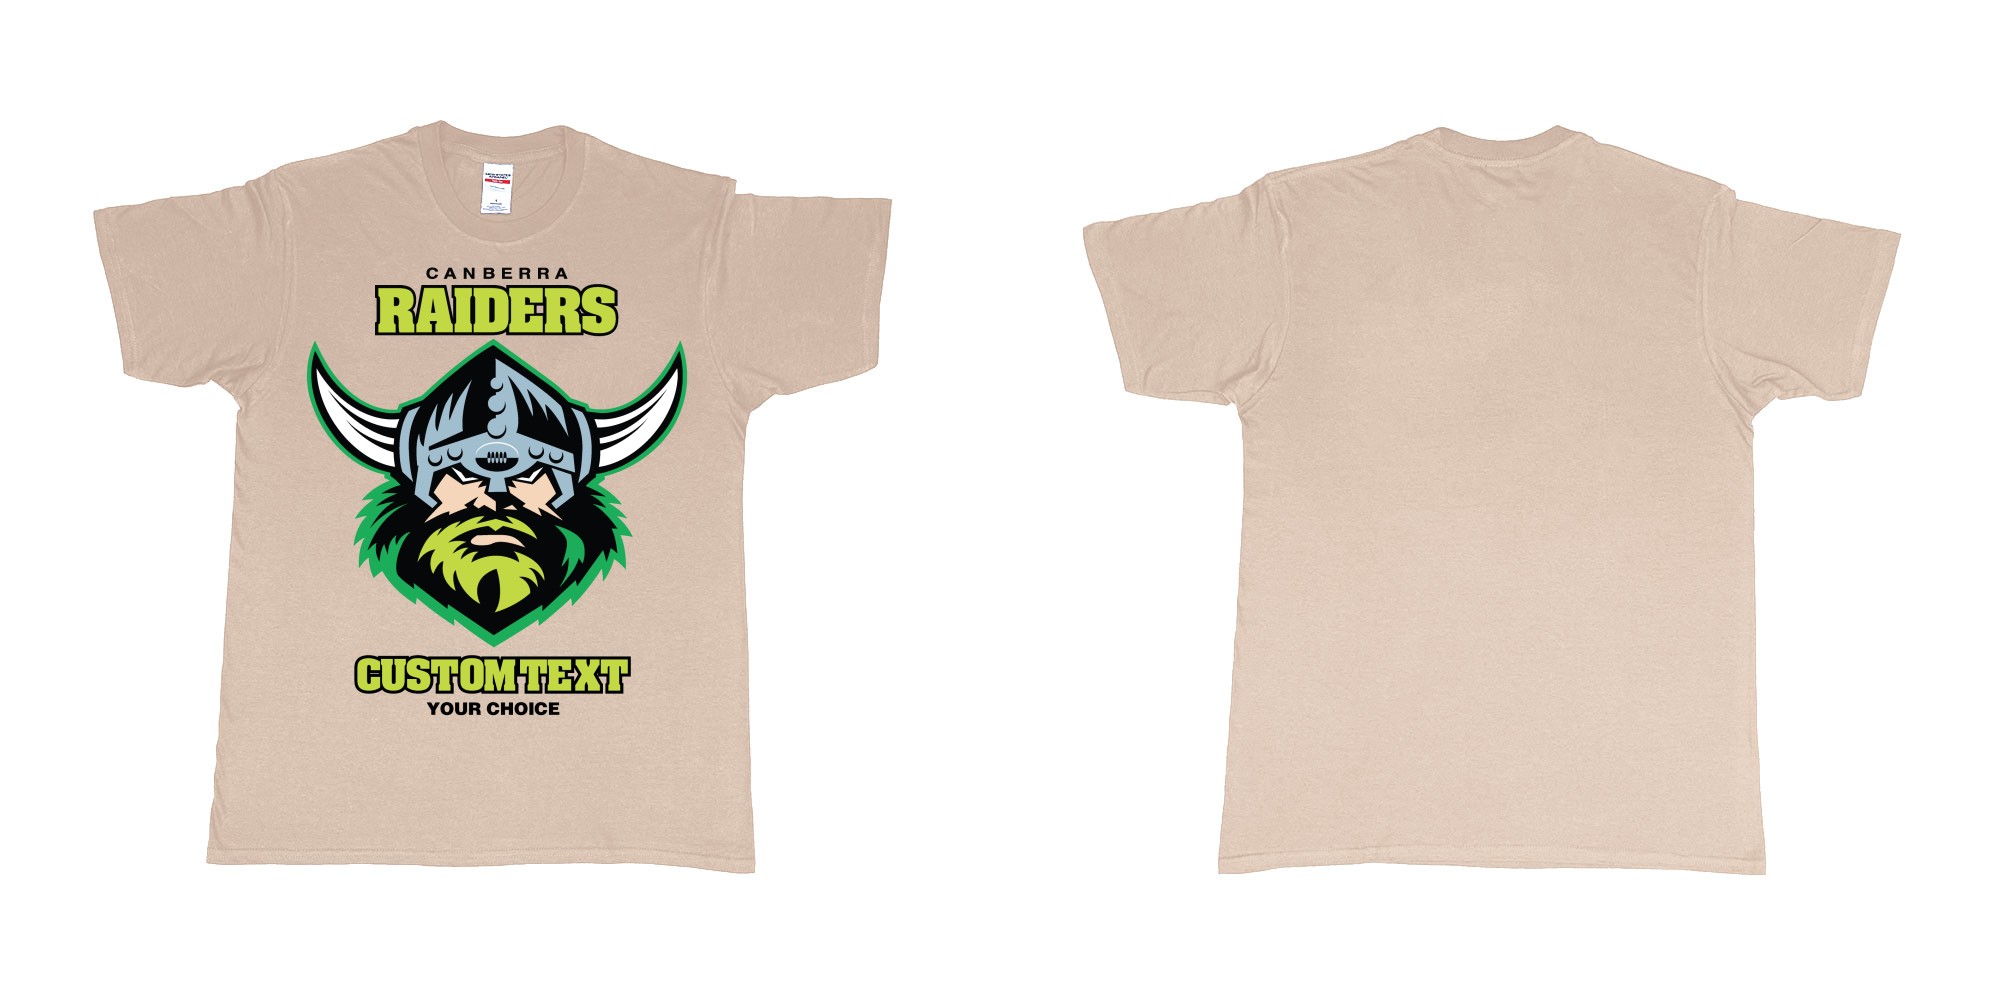 Custom tshirt design canberra raiders nrl logo own printed text near you in fabric color sand choice your own text made in Bali by The Pirate Way